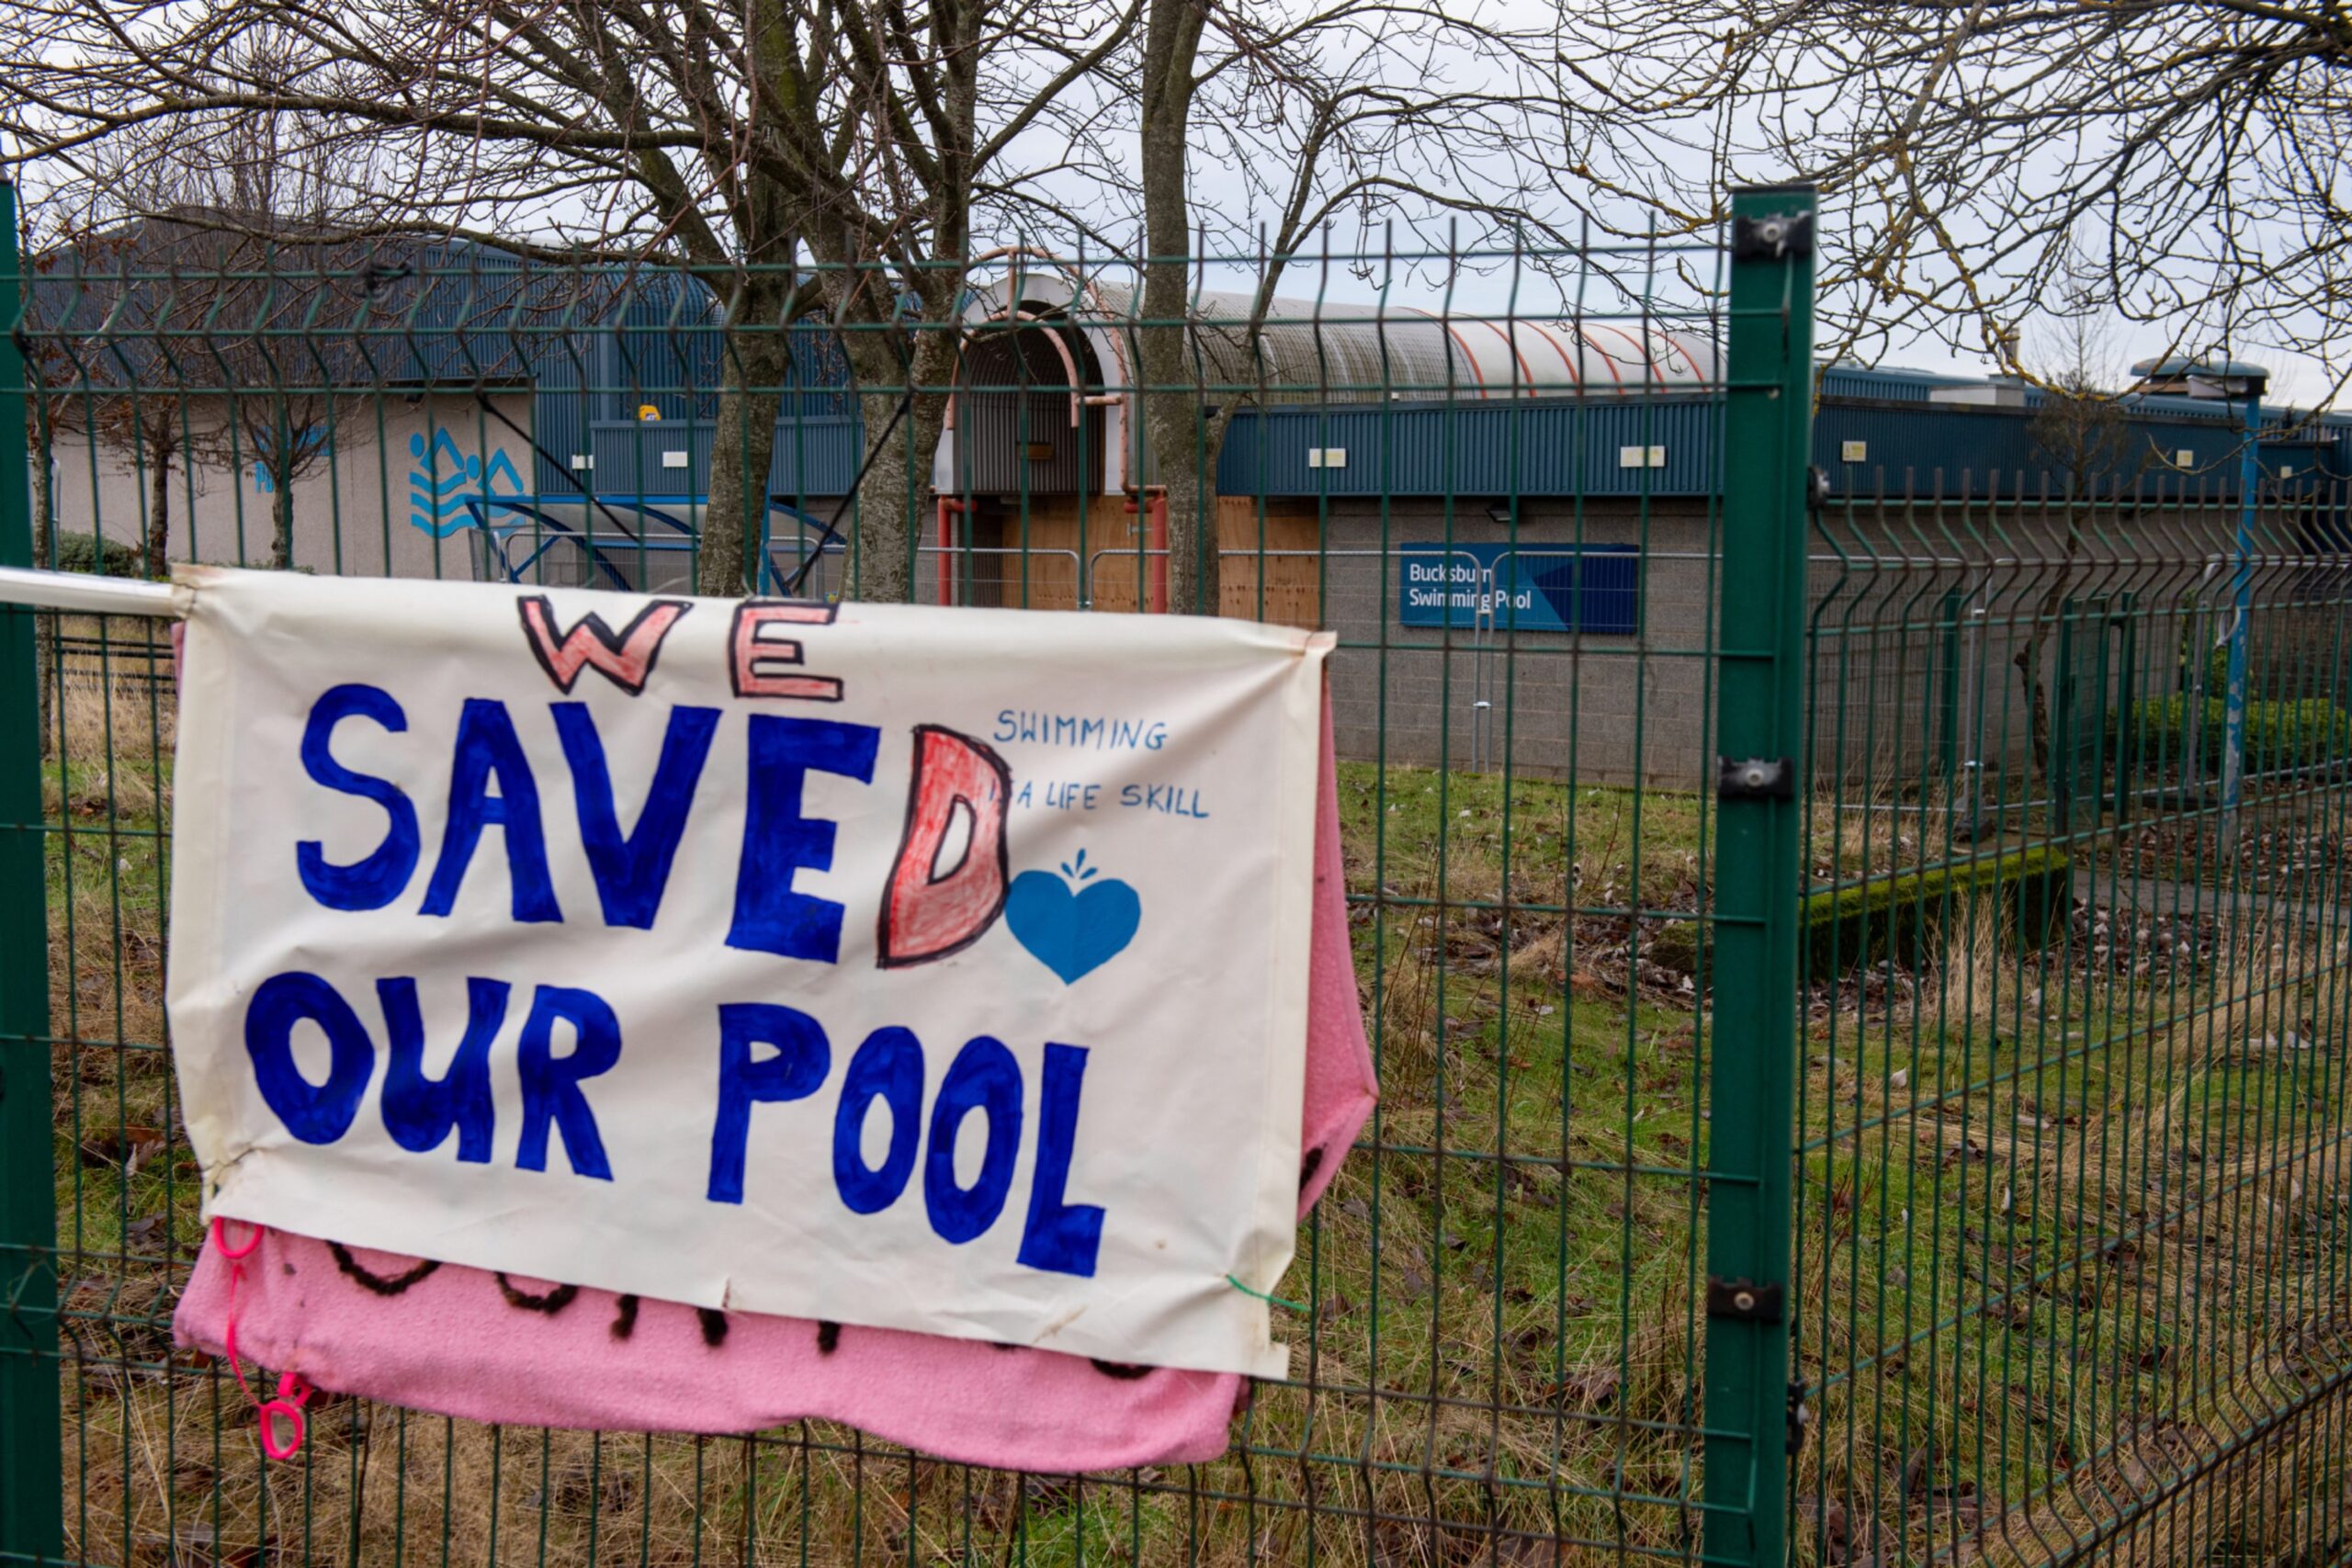 A fierce local campaign has forced a £1m U-turn to reopen Bucksburn pool. Image: Kenny Elrick/DC Thomson